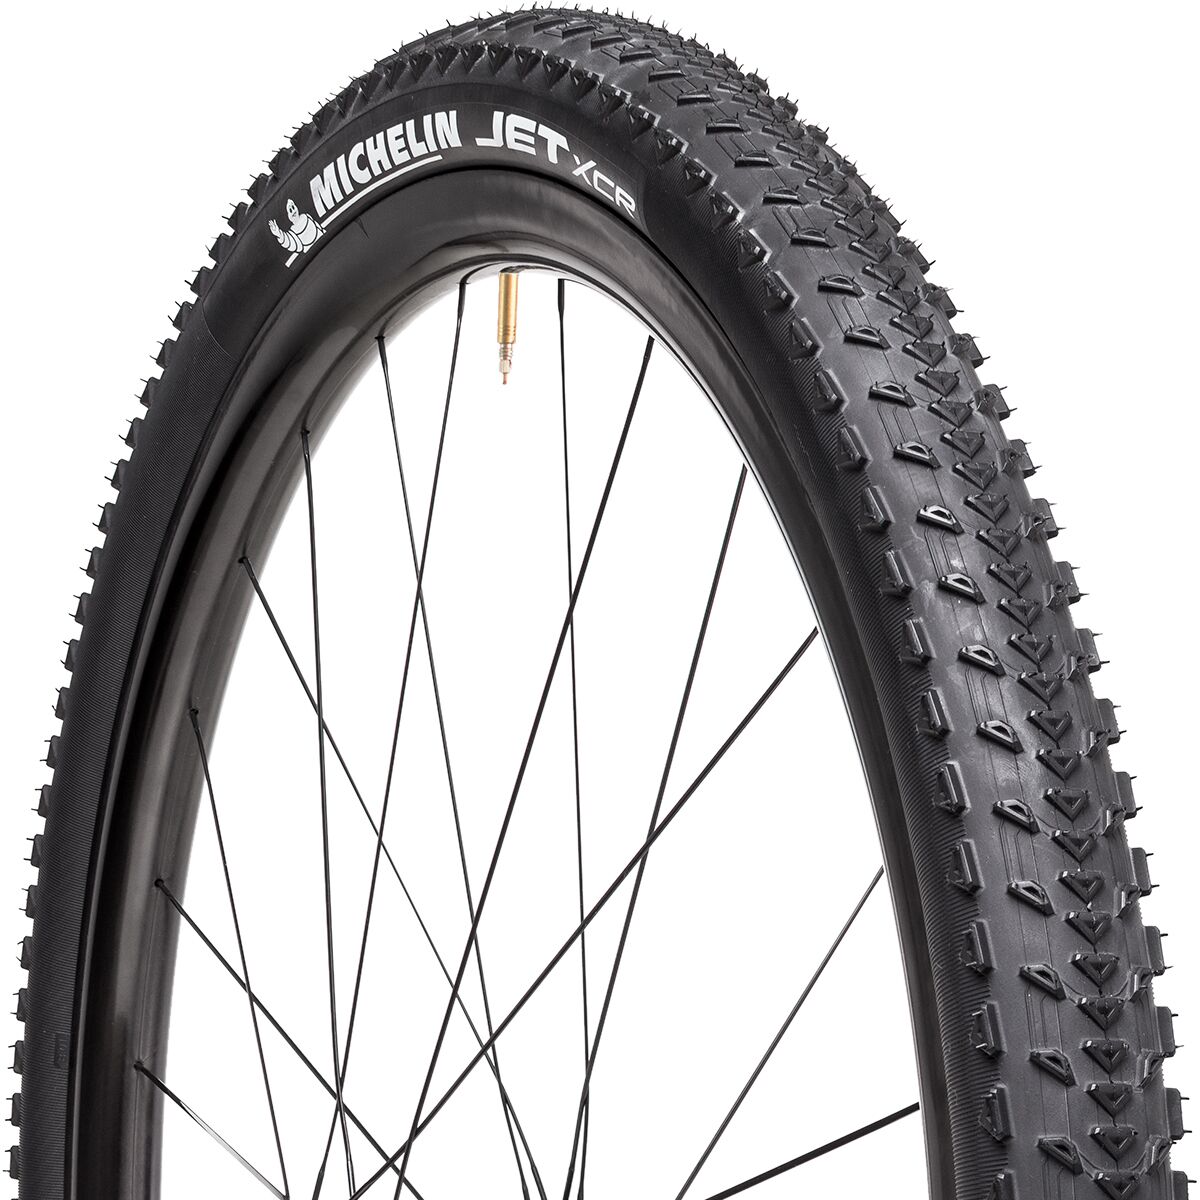 Michelin Jet XCR Tubeless 29in Tire